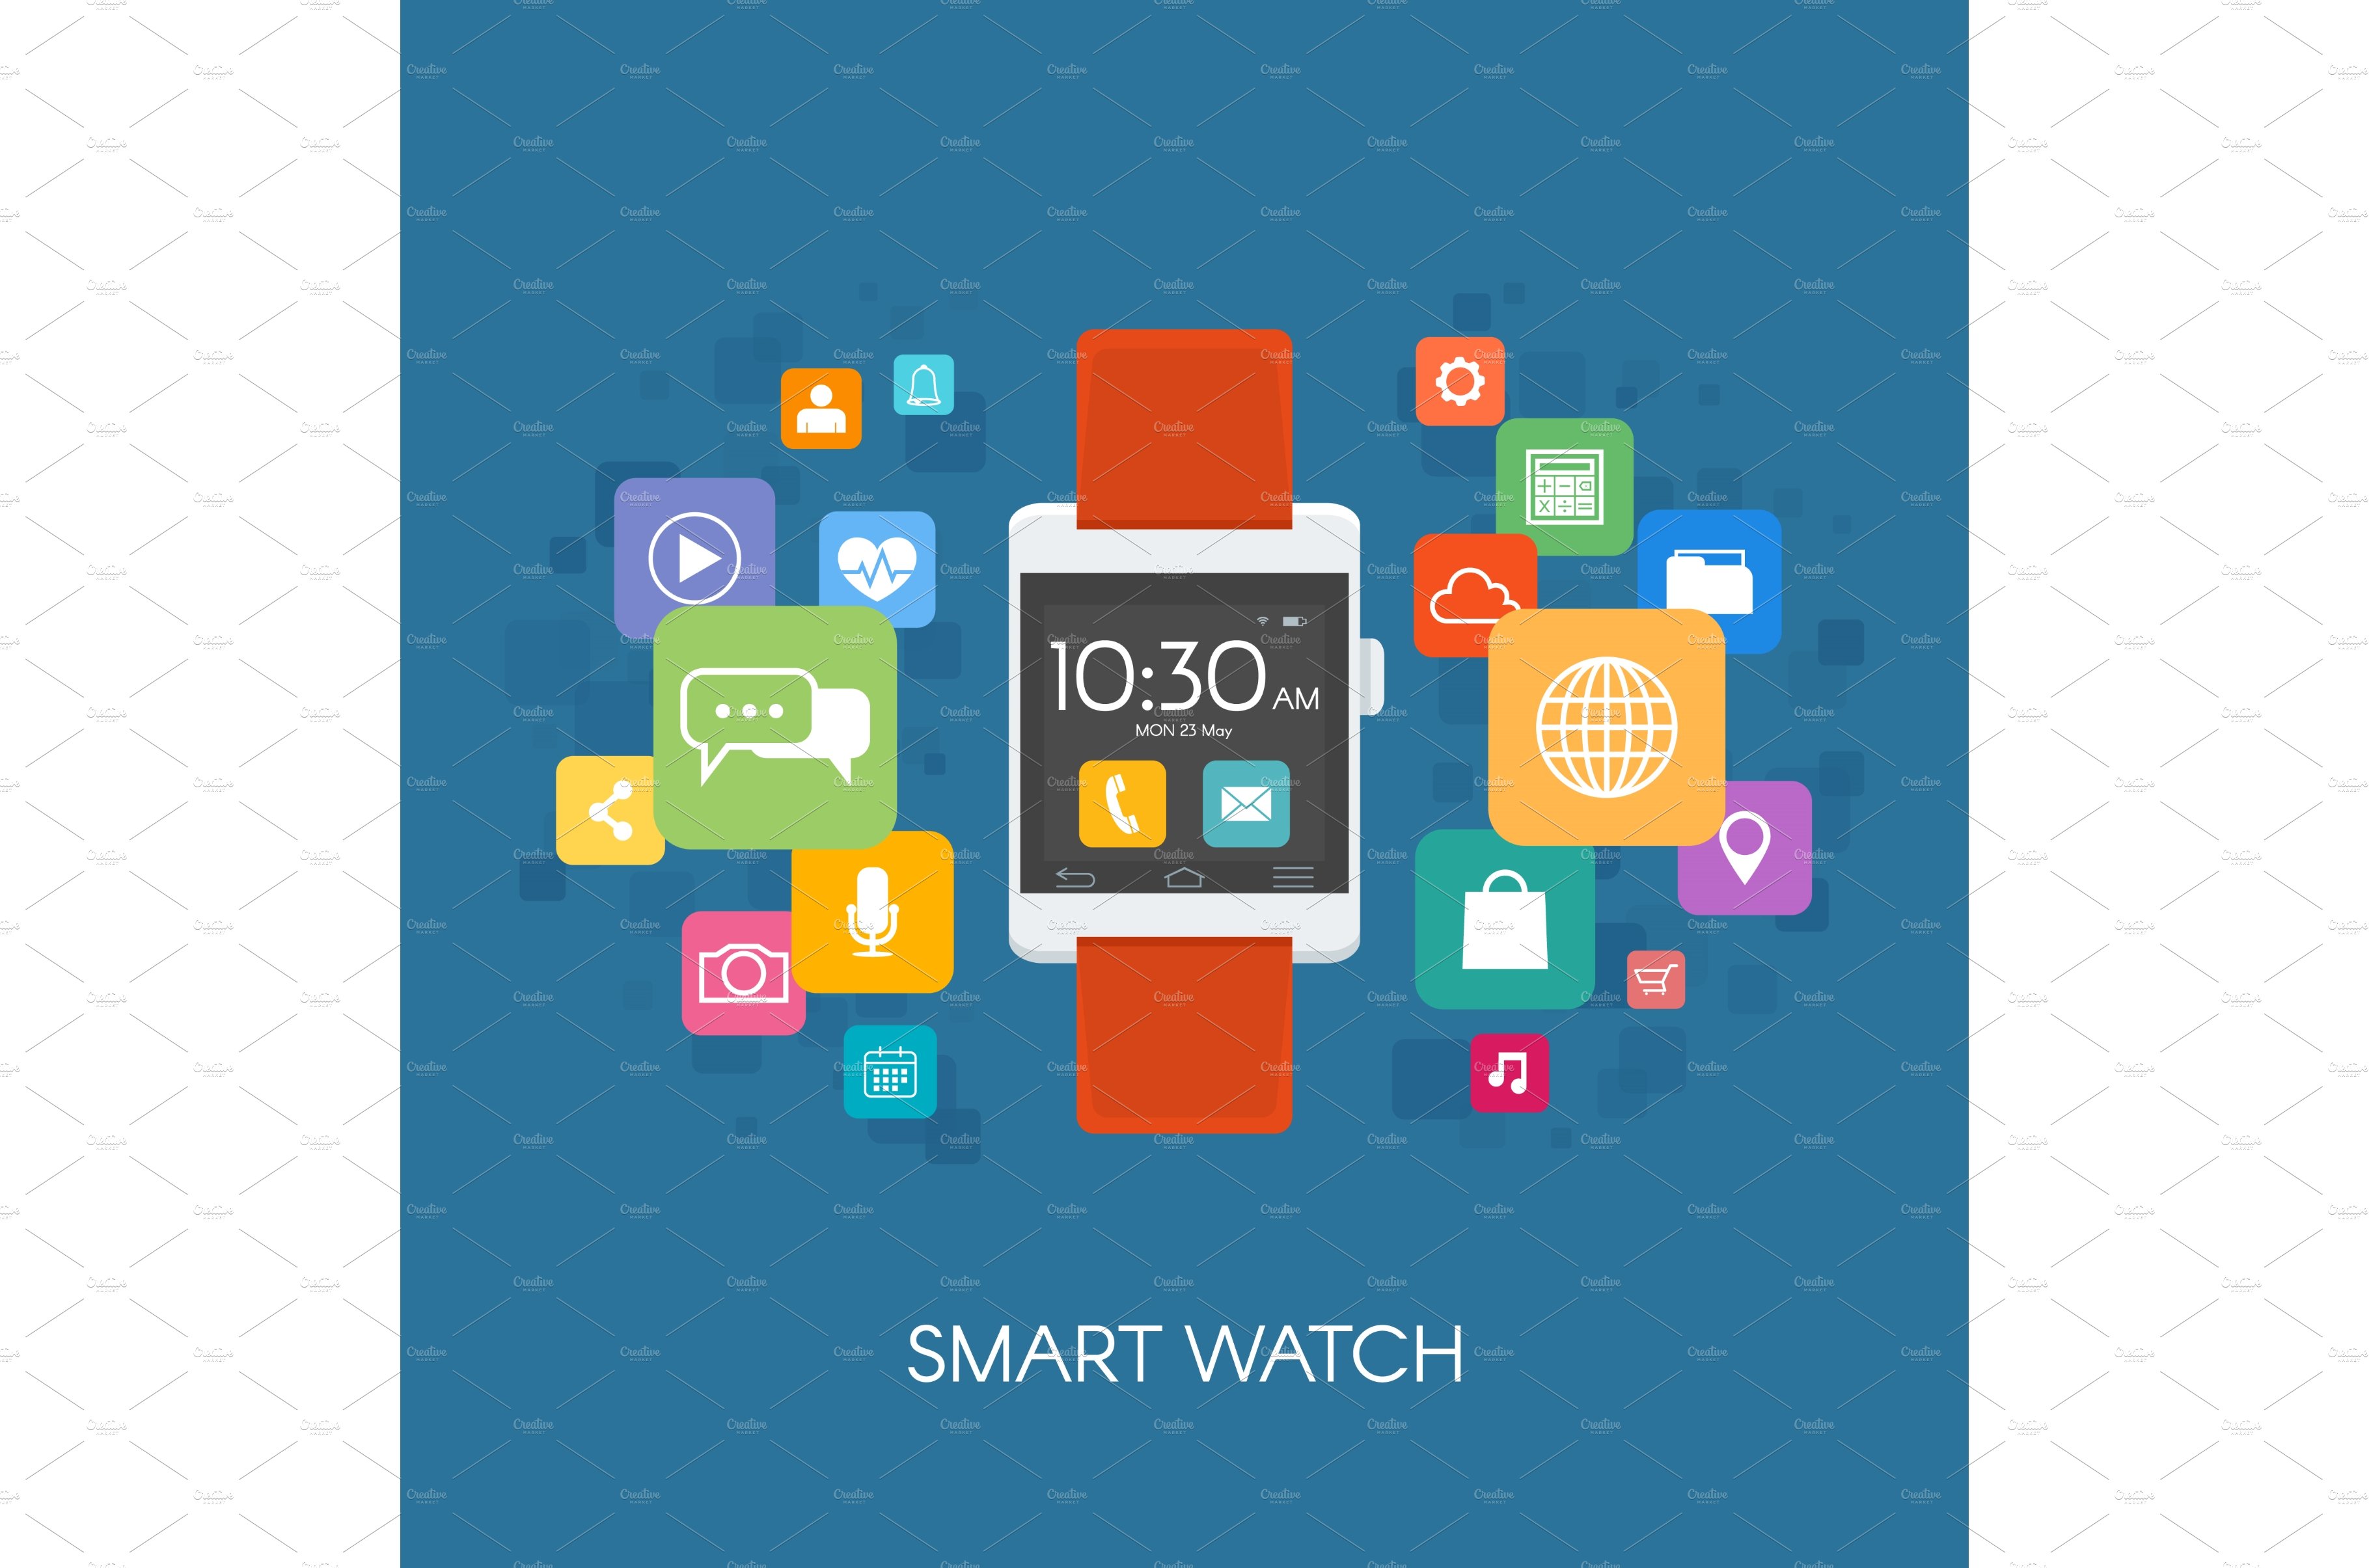 Watch with application icons cover image.